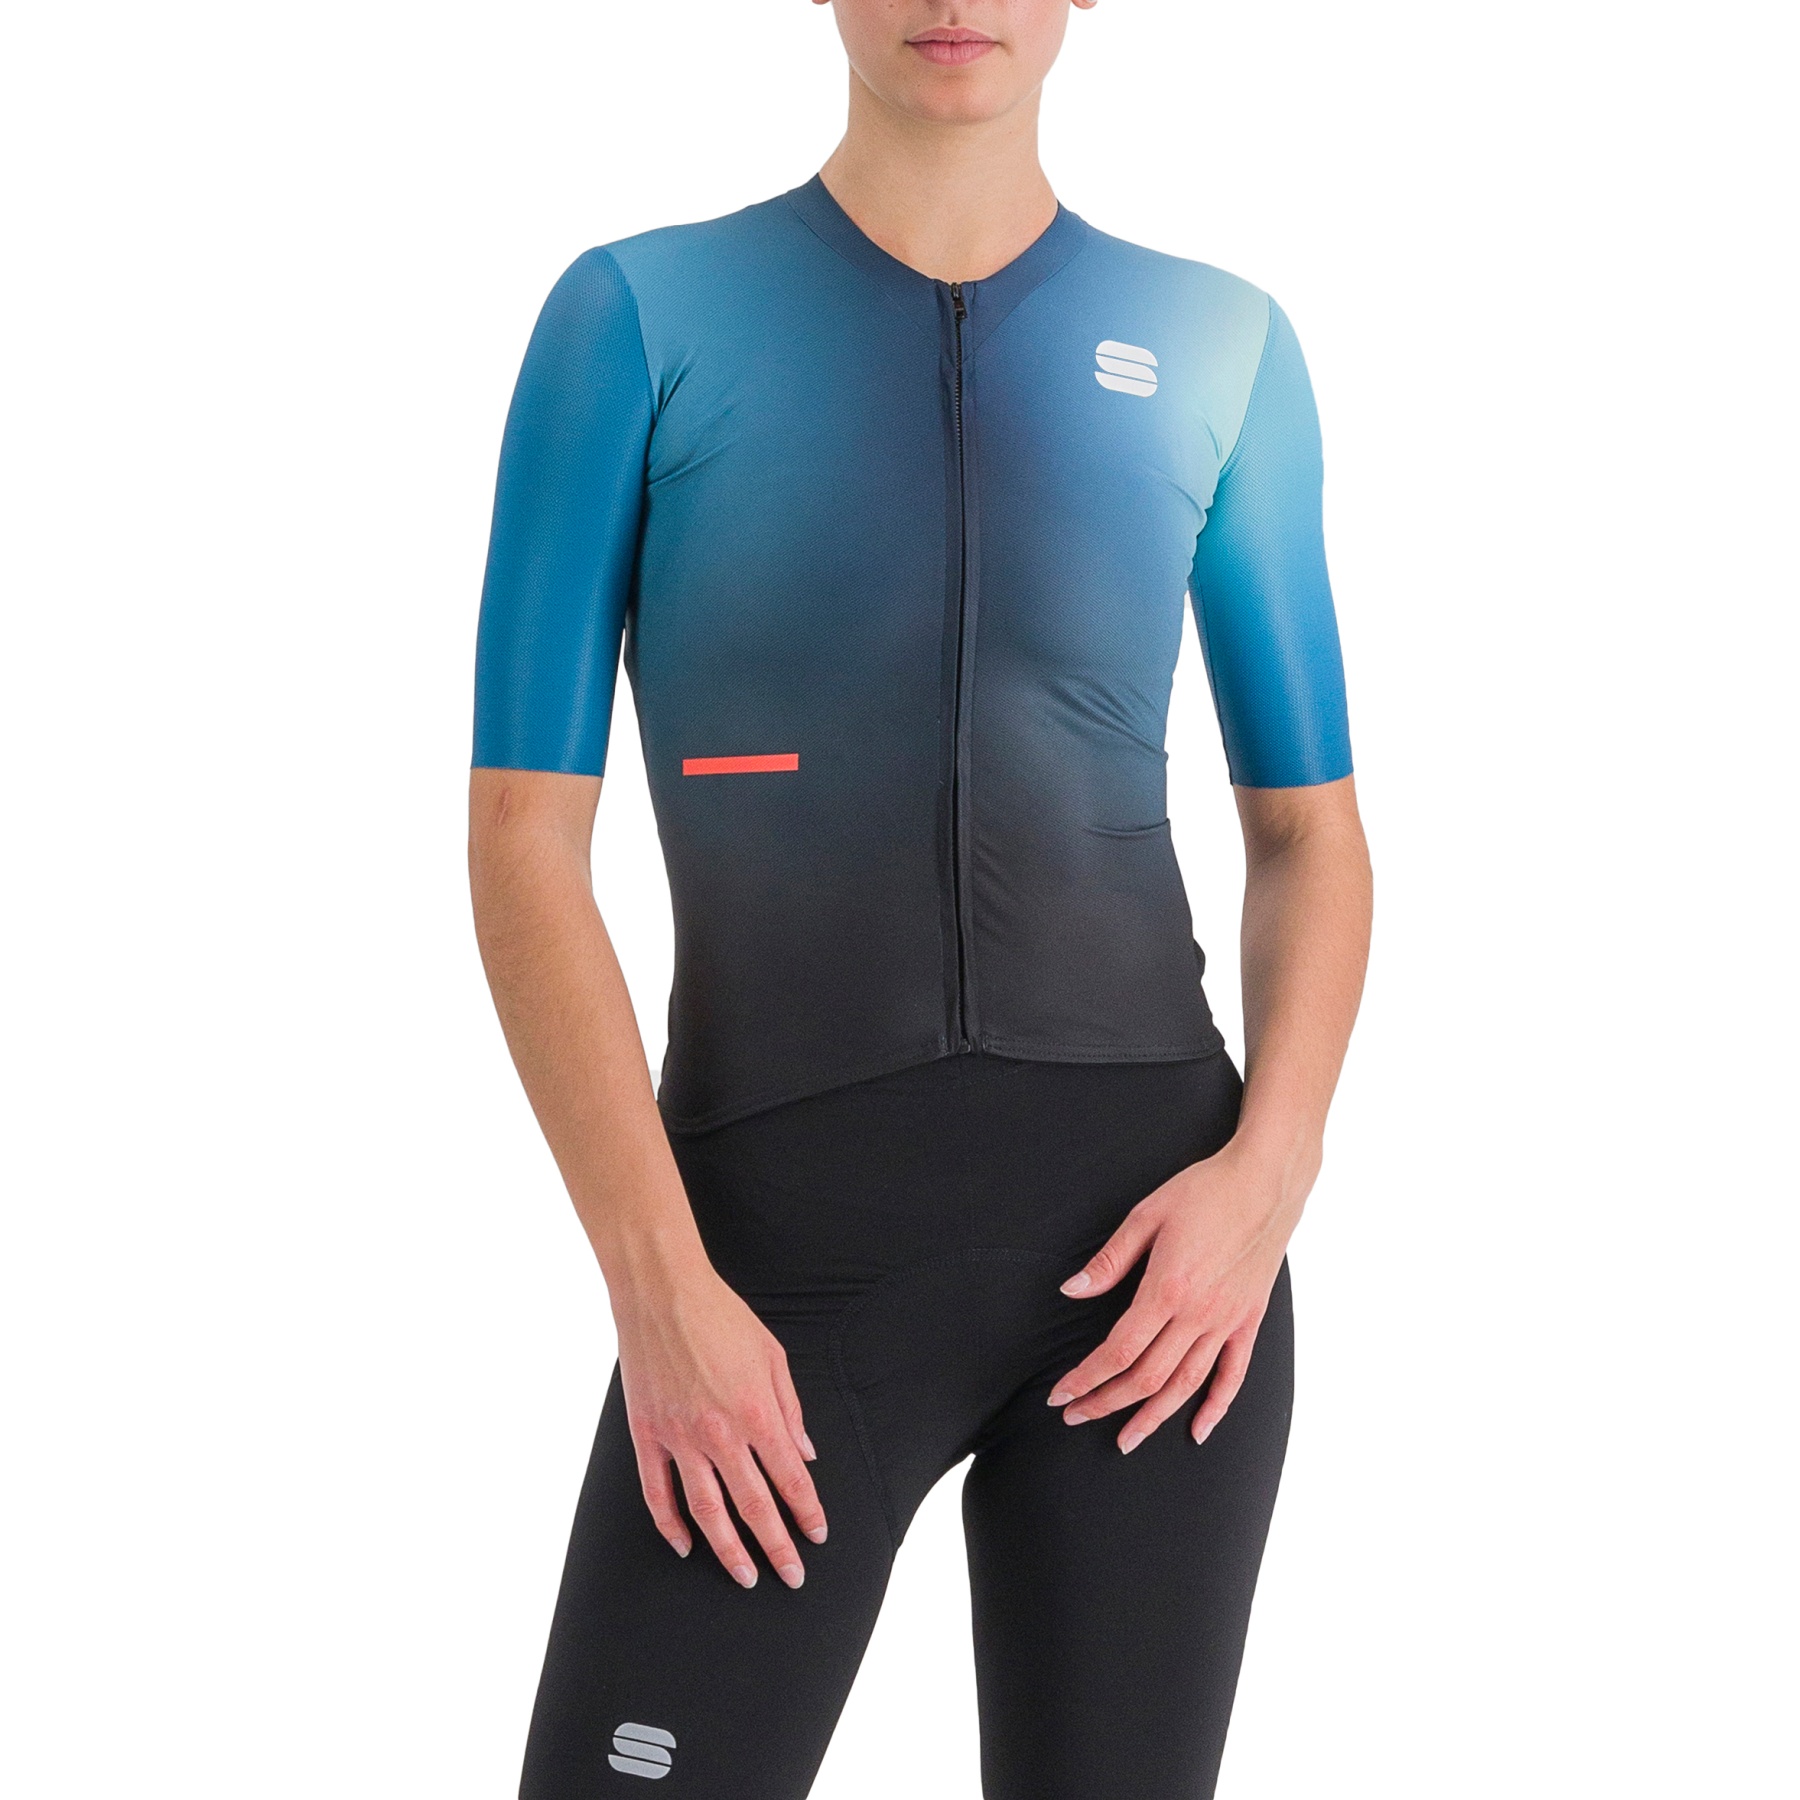 Picture of Sportful Bomber Women Suit - 464 Black Berry Blue